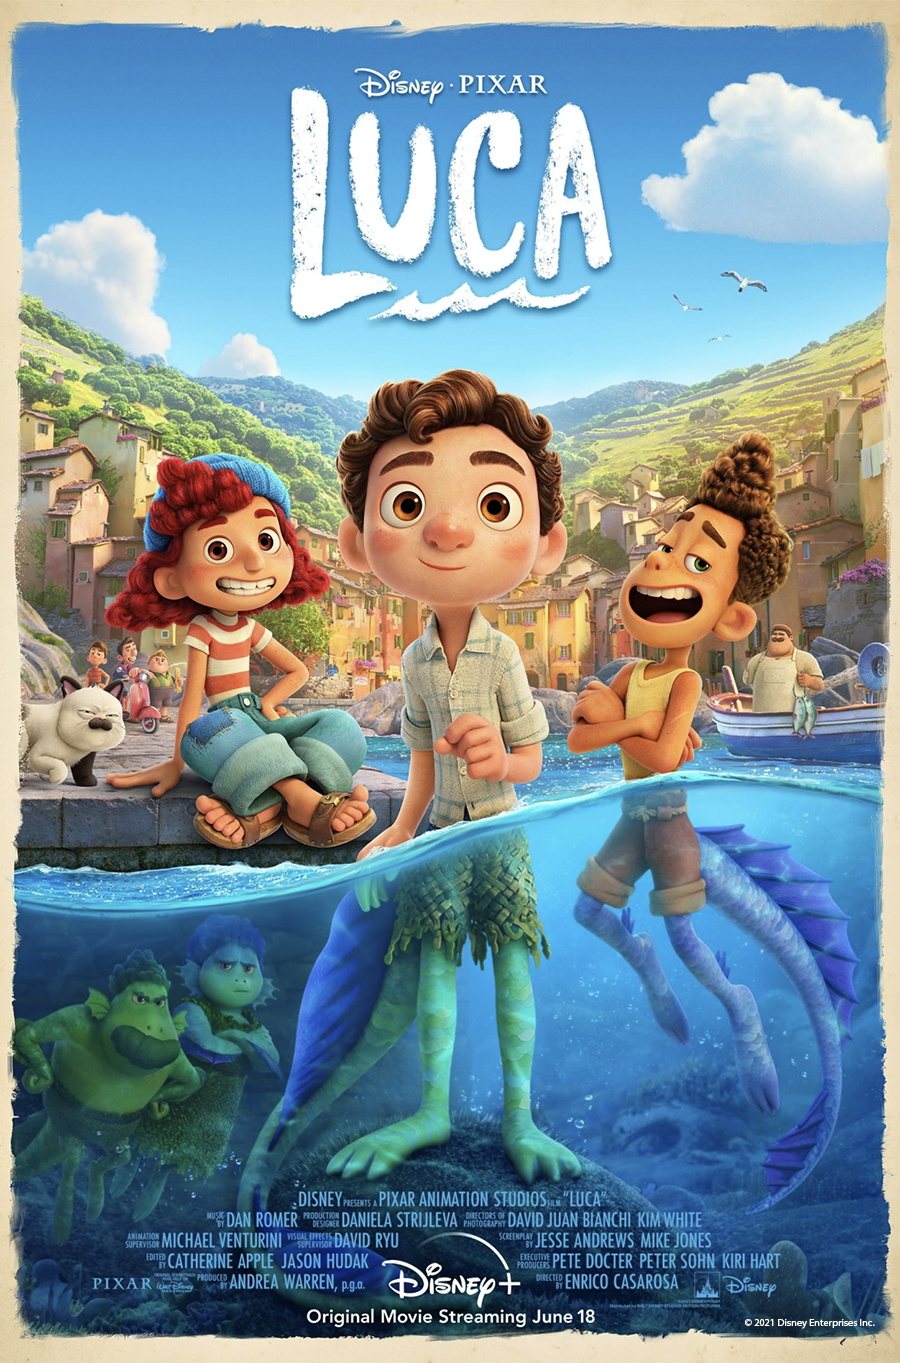 movie poster for Luca film. Children in water with sea creature features.